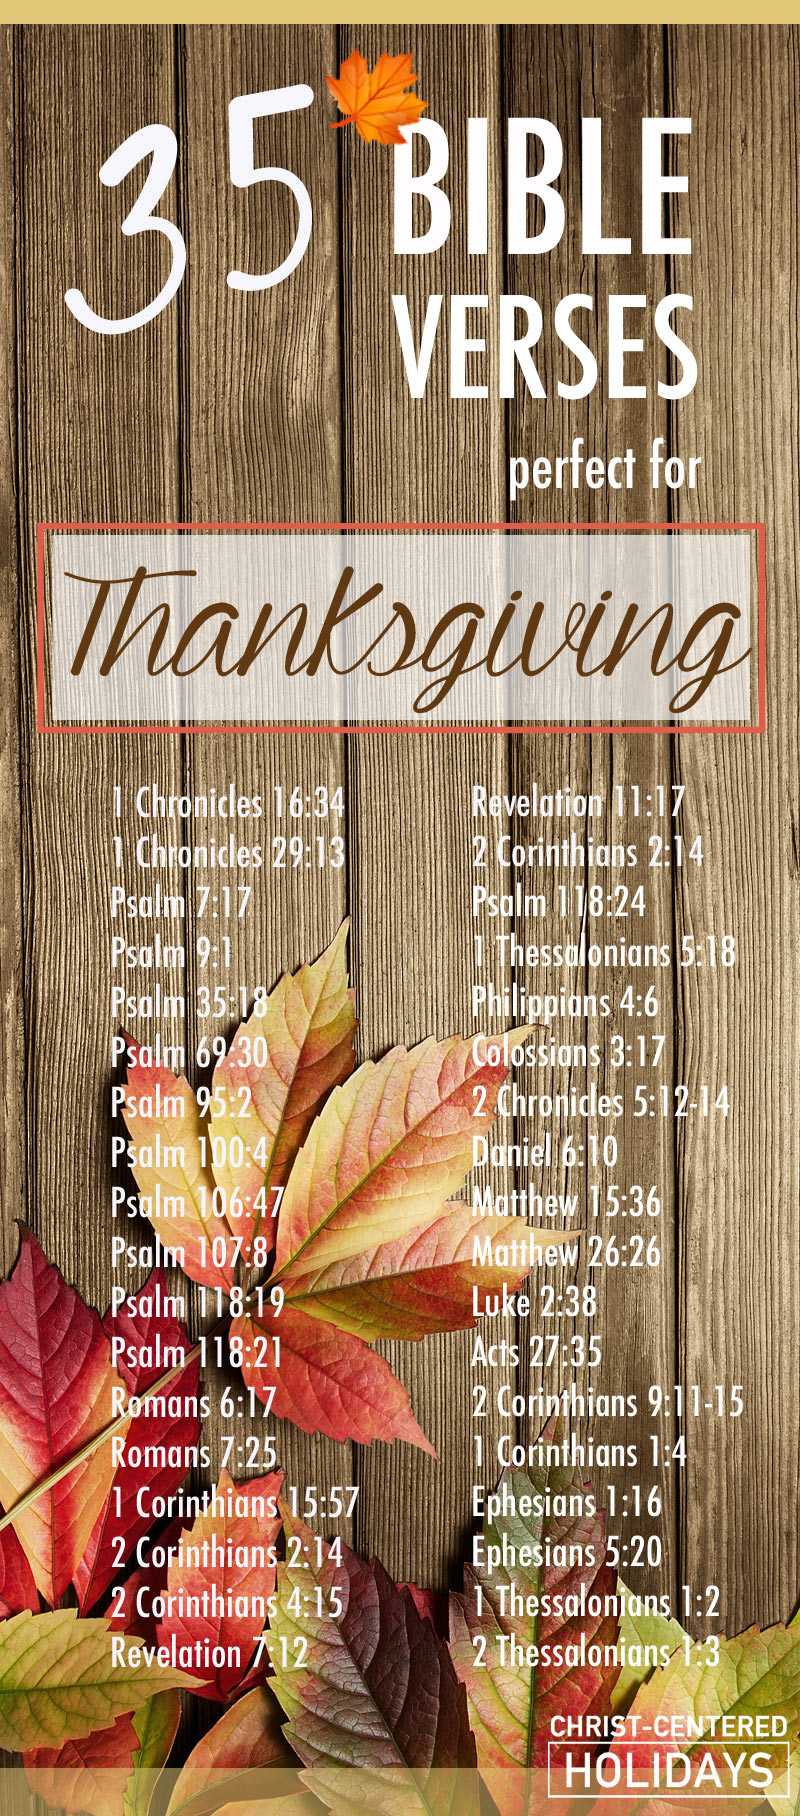 Thanksgiving Quotes Biblical
 35 Awesome Thanksgiving Bible Verses to with Your